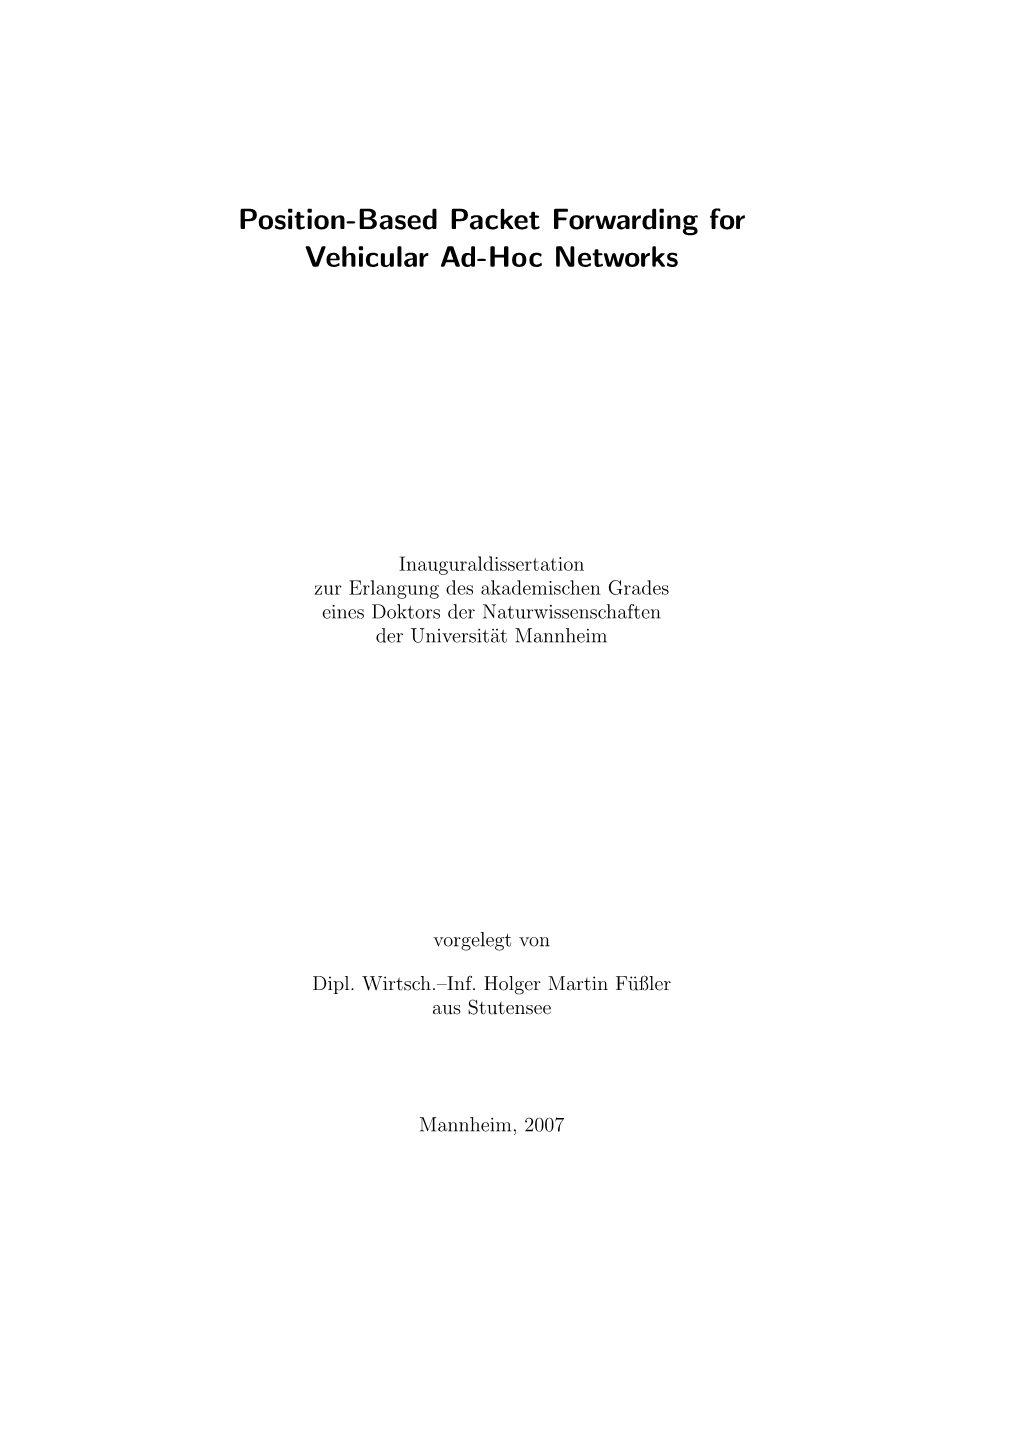 Position-Based Packet Forwarding for Vehicular Ad-Hoc Networks